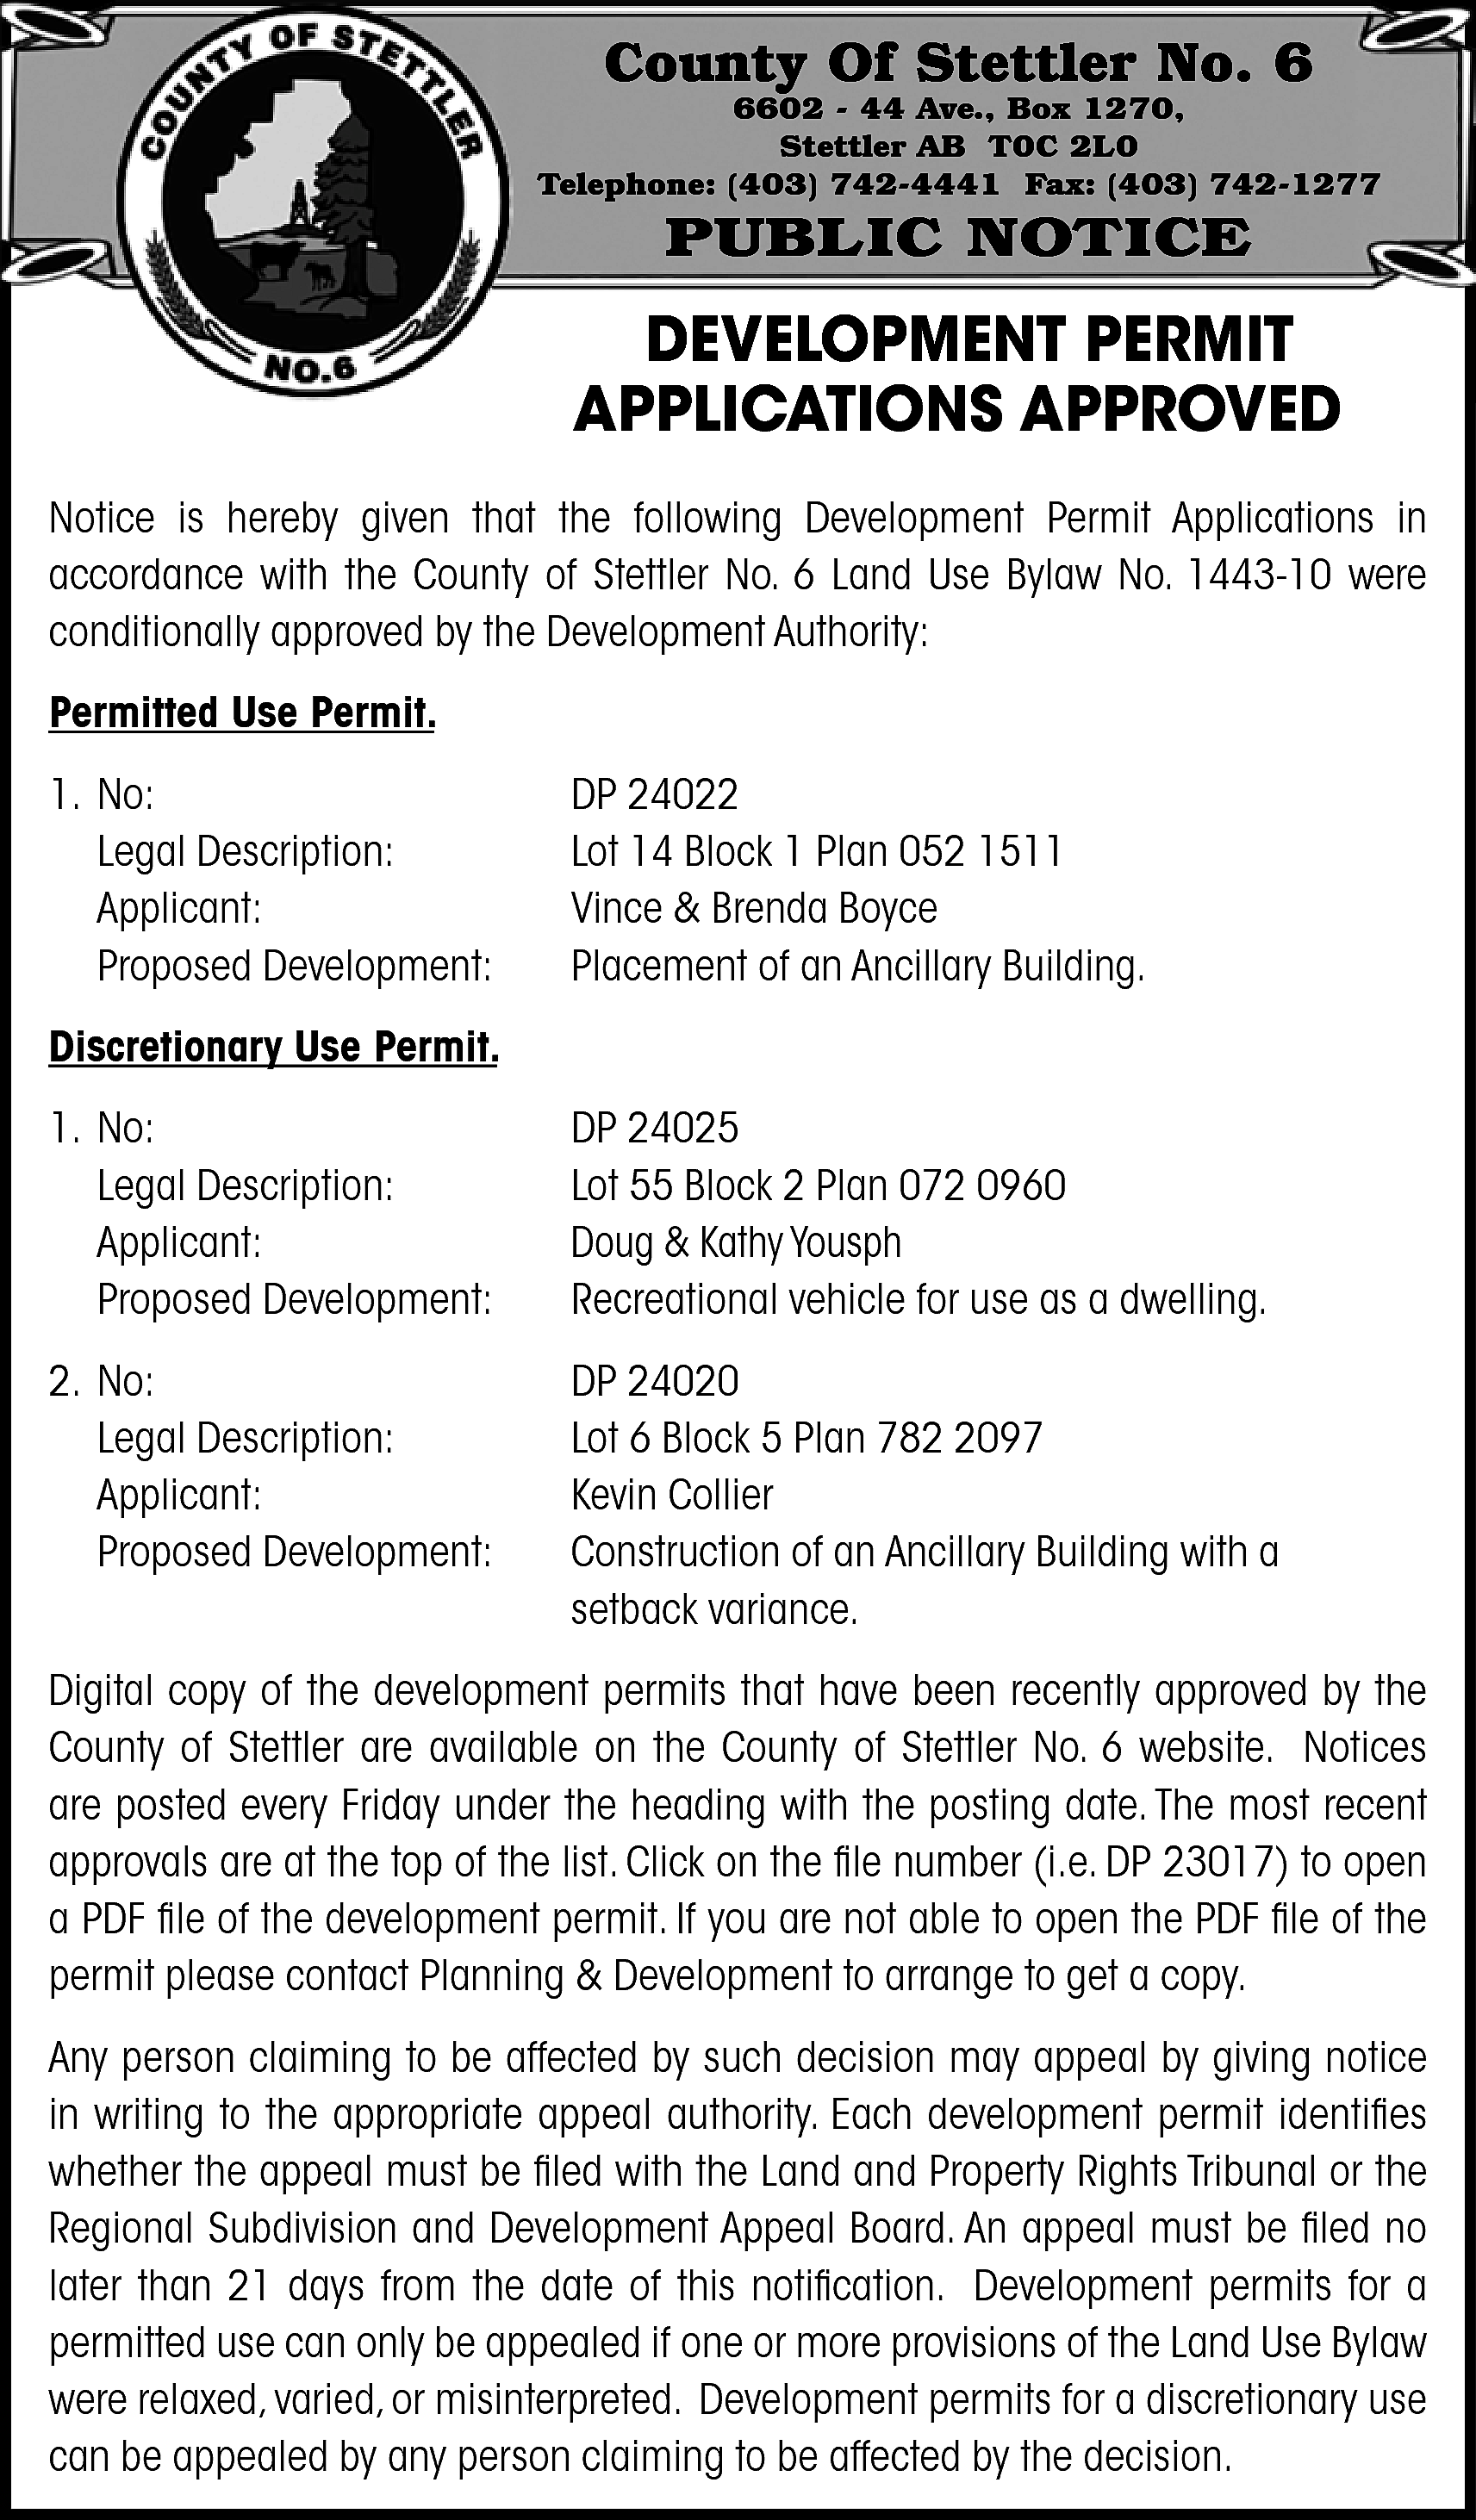 County Of Stettler No. 6  County Of Stettler No. 6    6602 - 44 Ave., Box 1270,  Stettler AB T0C 2L0  Telephone: (403) 742-4441 Fax: (403) 742-1277    PUBLIC NOTICE    DEVELOPMENT PERMIT  APPLICATIONS APPROVED  Notice is hereby given that the following Development Permit Applications in  accordance with the County of Stettler No. 6 Land Use Bylaw No. 1443-10 were  conditionally approved by the Development Authority:  Permitted Use Permit.  1. No:  Legal Description:  Applicant:  Proposed Development:    DP 24022  Lot 14 Block 1 Plan 052 1511  Vince & Brenda Boyce  Placement of an Ancillary Building.    Discretionary Use Permit.  1. No:  Legal Description:  Applicant:  Proposed Development:    DP 24025  Lot 55 Block 2 Plan 072 0960  Doug & Kathy Yousph  Recreational vehicle for use as a dwelling.    2. No:  Legal Description:  Applicant:  Proposed Development:    DP 24020  Lot 6 Block 5 Plan 782 2097  Kevin Collier  Construction of an Ancillary Building with a  setback variance.    Digital copy of the development permits that have been recently approved by the  County of Stettler are available on the County of Stettler No. 6 website. Notices  are posted every Friday under the heading with the posting date. The most recent  approvals are at the top of the list. Click on the file number (i.e. DP 23017) to open  a PDF file of the development permit. If you are not able to open the PDF file of the  permit please contact Planning & Development to arrange to get a copy.  Any person claiming to be affected by such decision may appeal by giving notice  in writing to the appropriate appeal authority. Each development permit identifies  whether the appeal must be filed with the Land and Property Rights Tribunal or the  Regional Subdivision and Development Appeal Board. An appeal must be filed no  later than 21 days from the date of this notification. Development permits for a  permitted use can only be appealed if one or more provisions of the Land Use Bylaw  were relaxed, varied, or misinterpreted. Development permits for a discretionary use  can be appealed by any person claiming to be affected by the decision.    